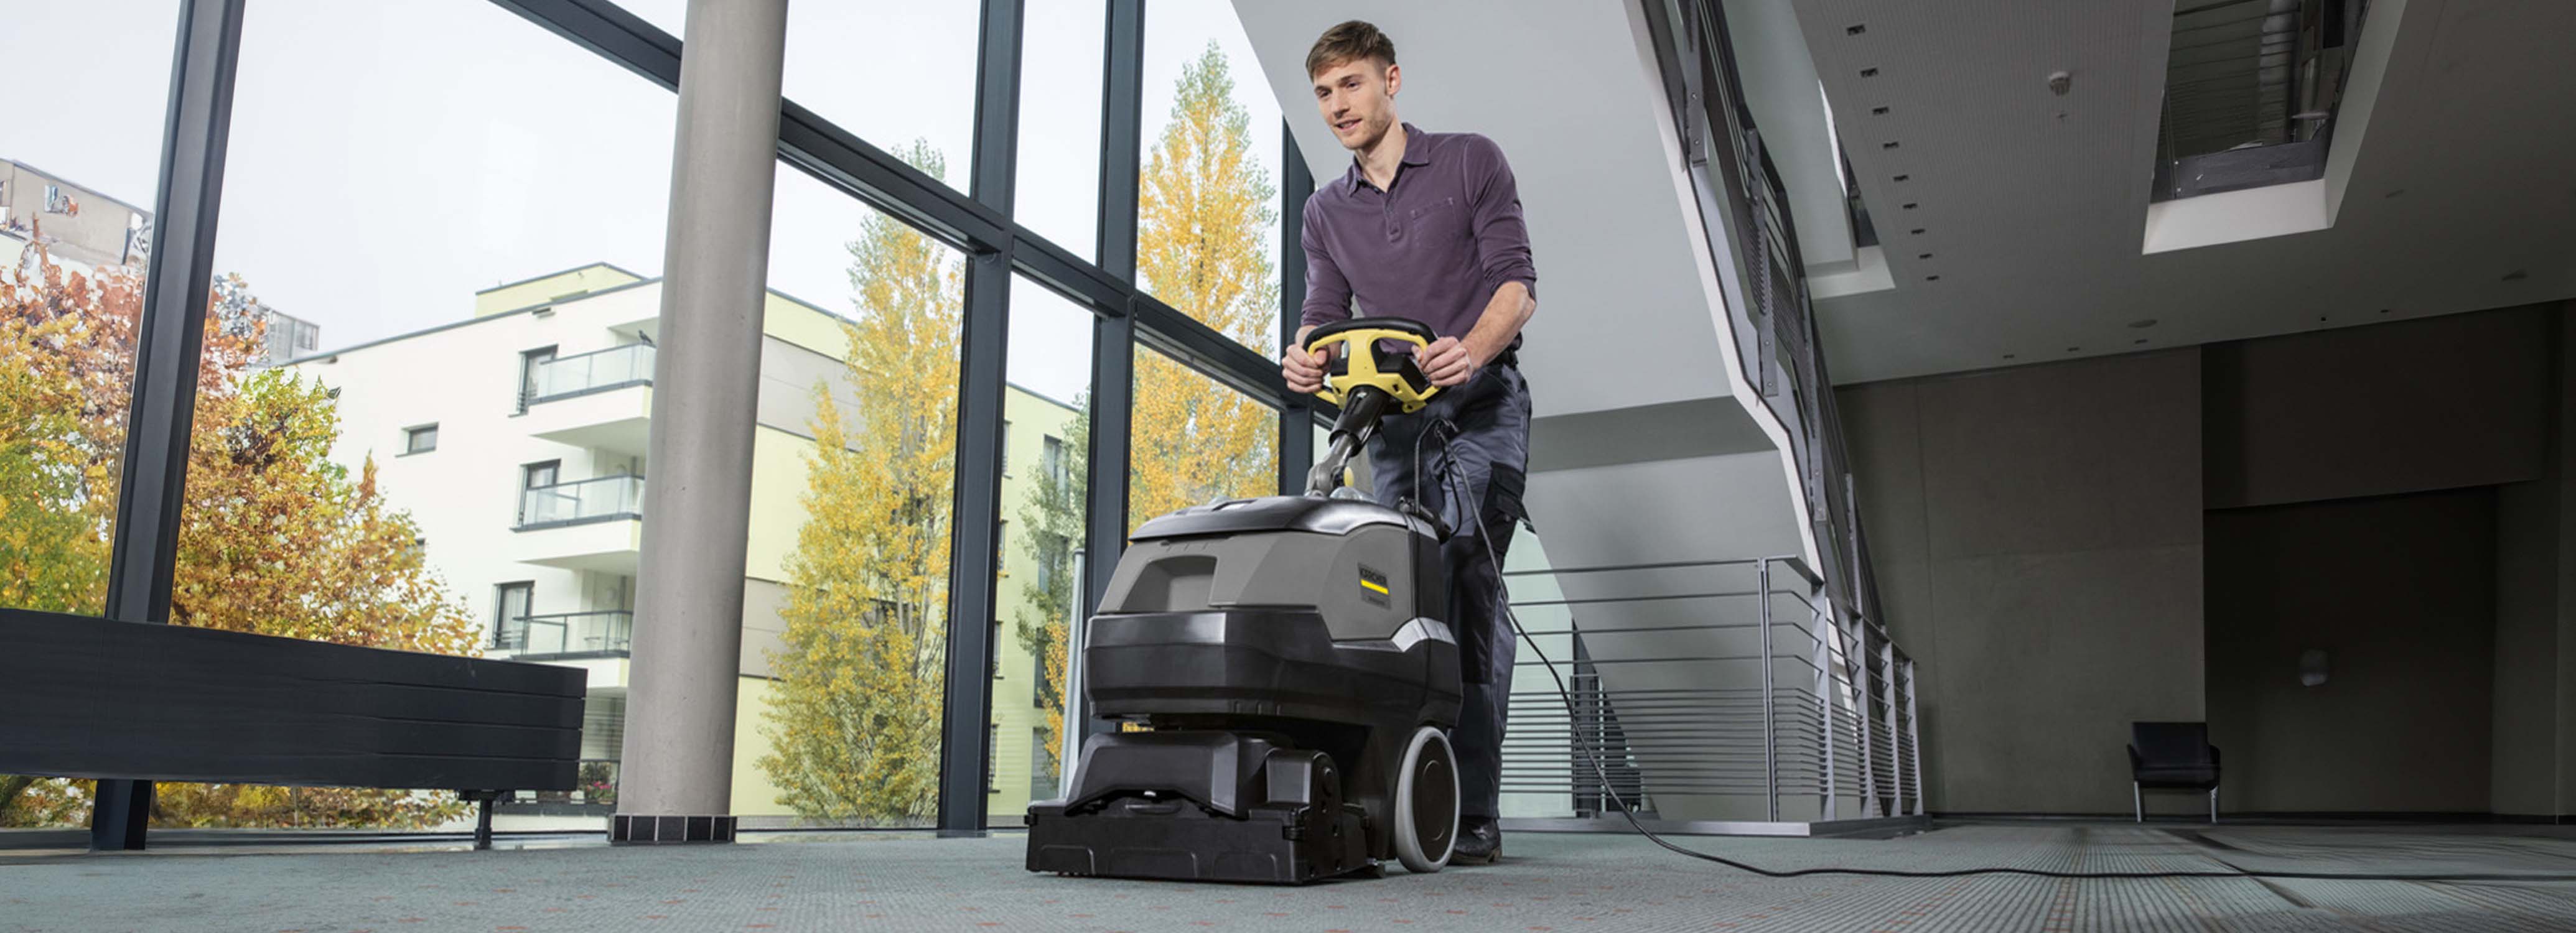 Carpet cleaning machines